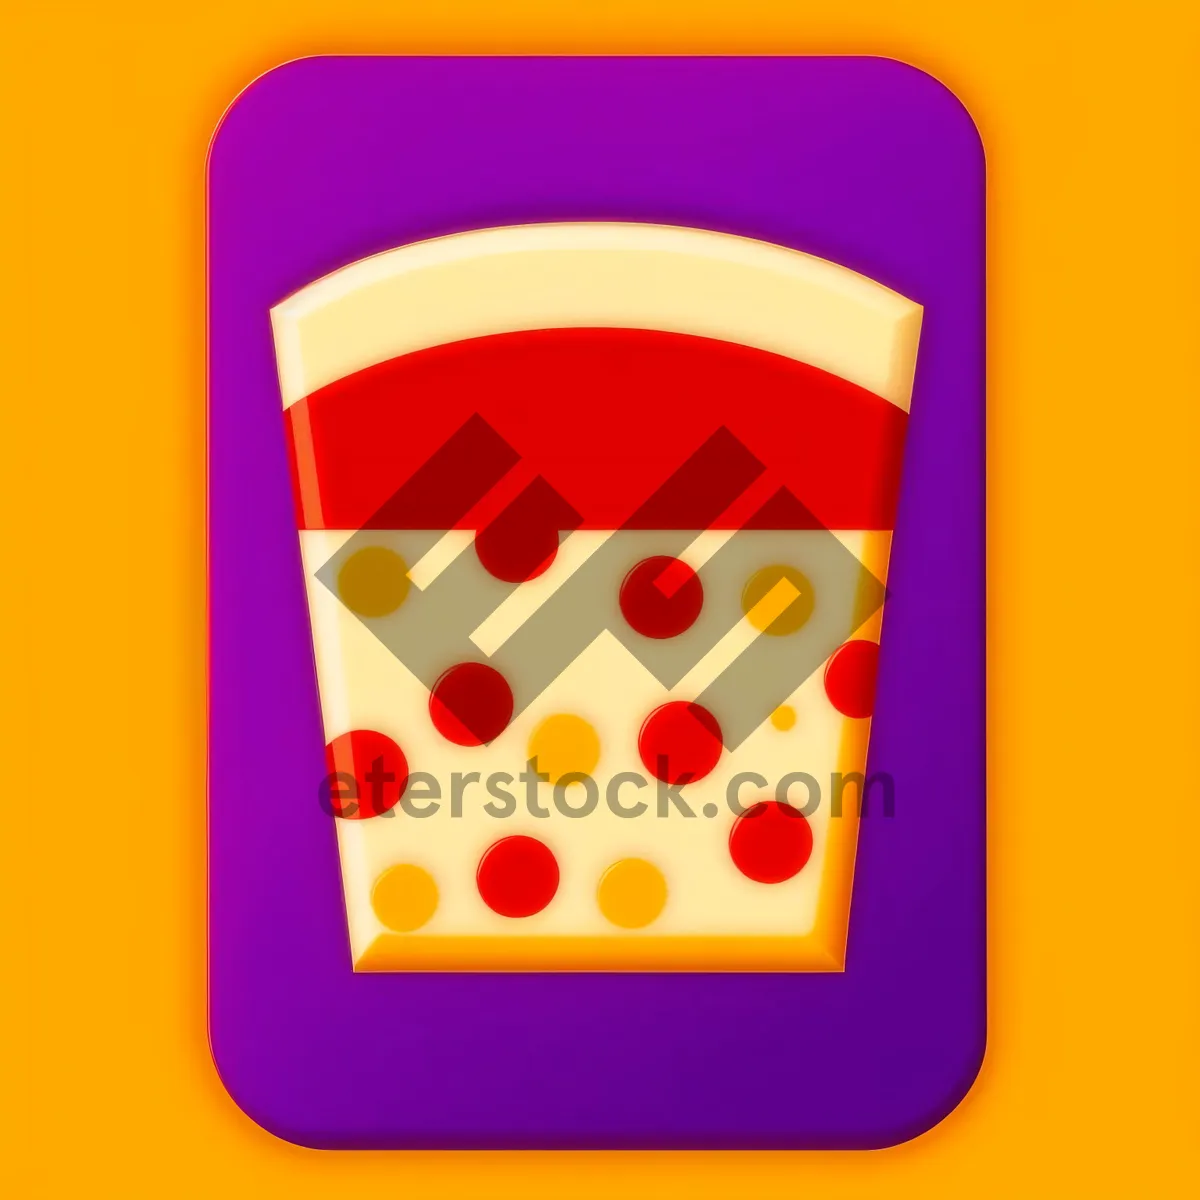 Picture of Vibrant Purple Chrome Button with 3D Jelly Shadow